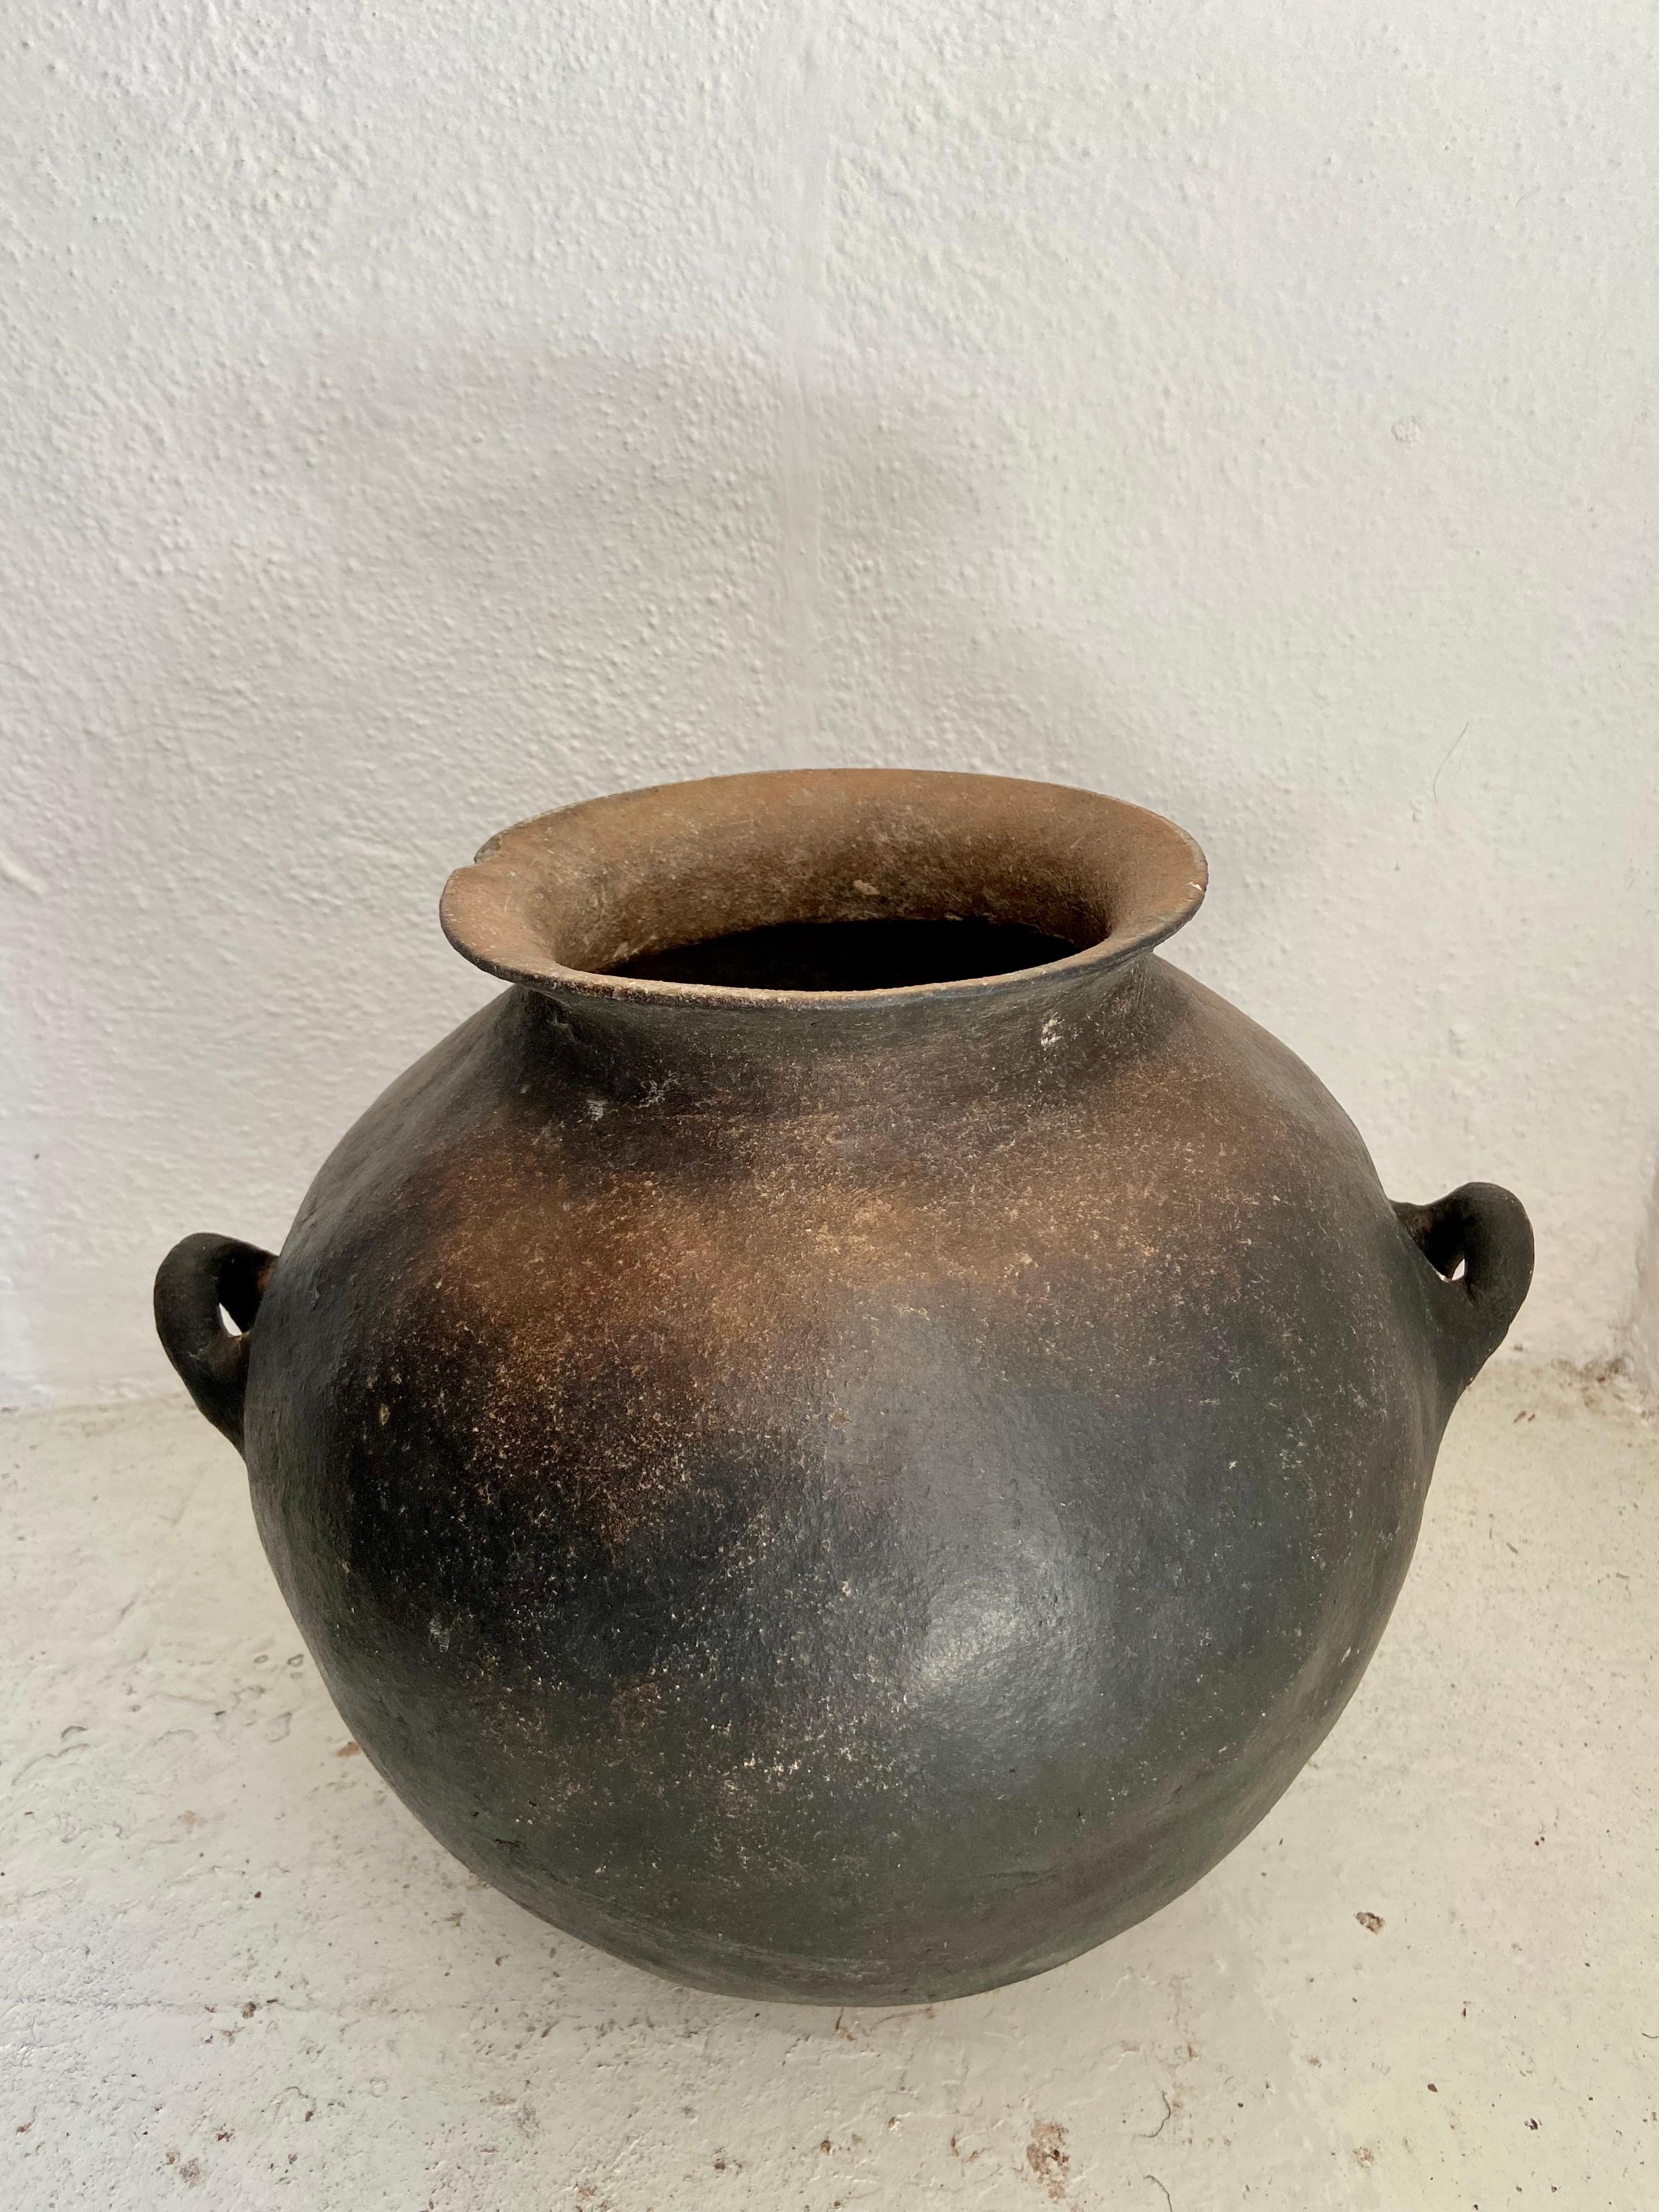 Mid 20th century terracotta water pot from Central Mexico. Used for cooking, this form of pottery is unique to the Nahuatl speaking indigenous communities of the northern, remote communities of Puebla.